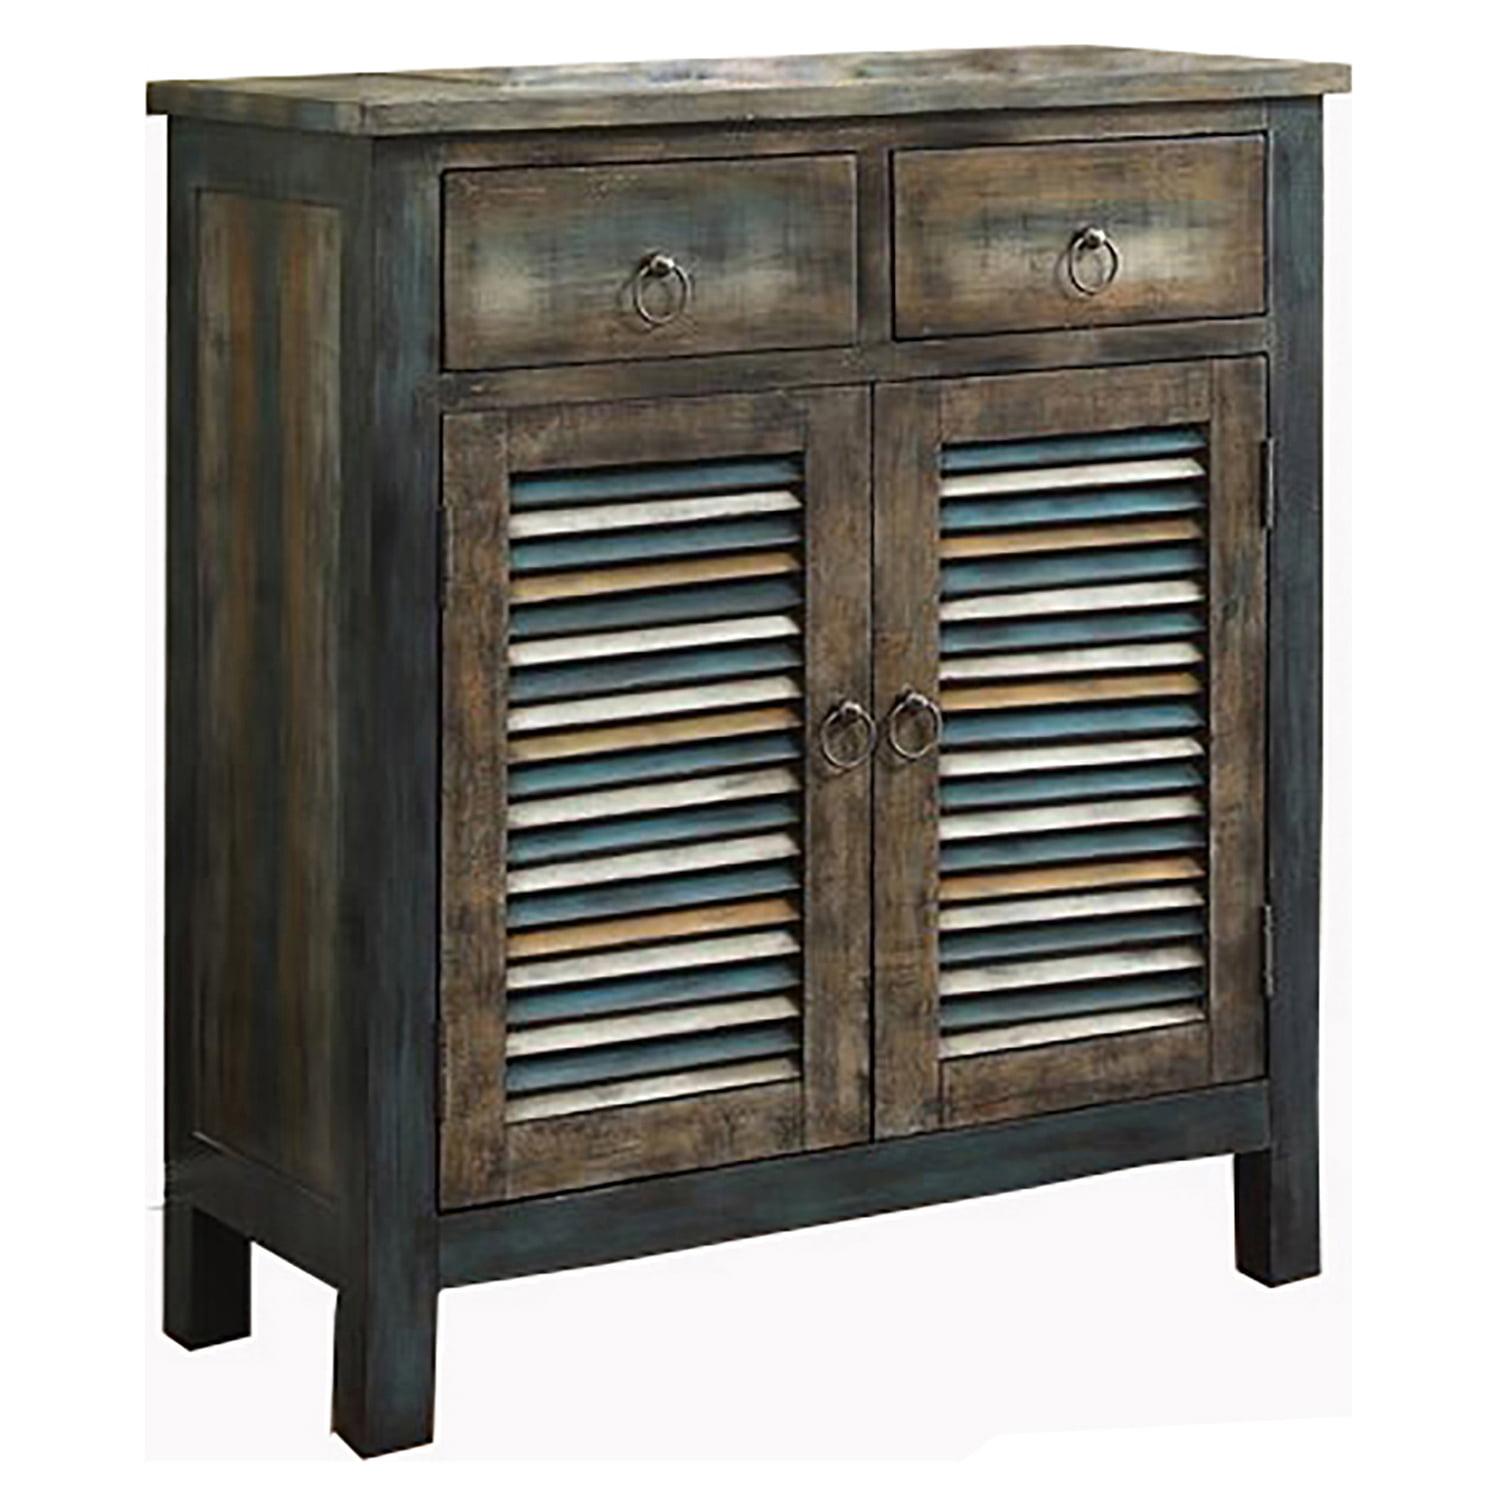 Antique Oak and Teal Vintage-Inspired Console Table with Storage